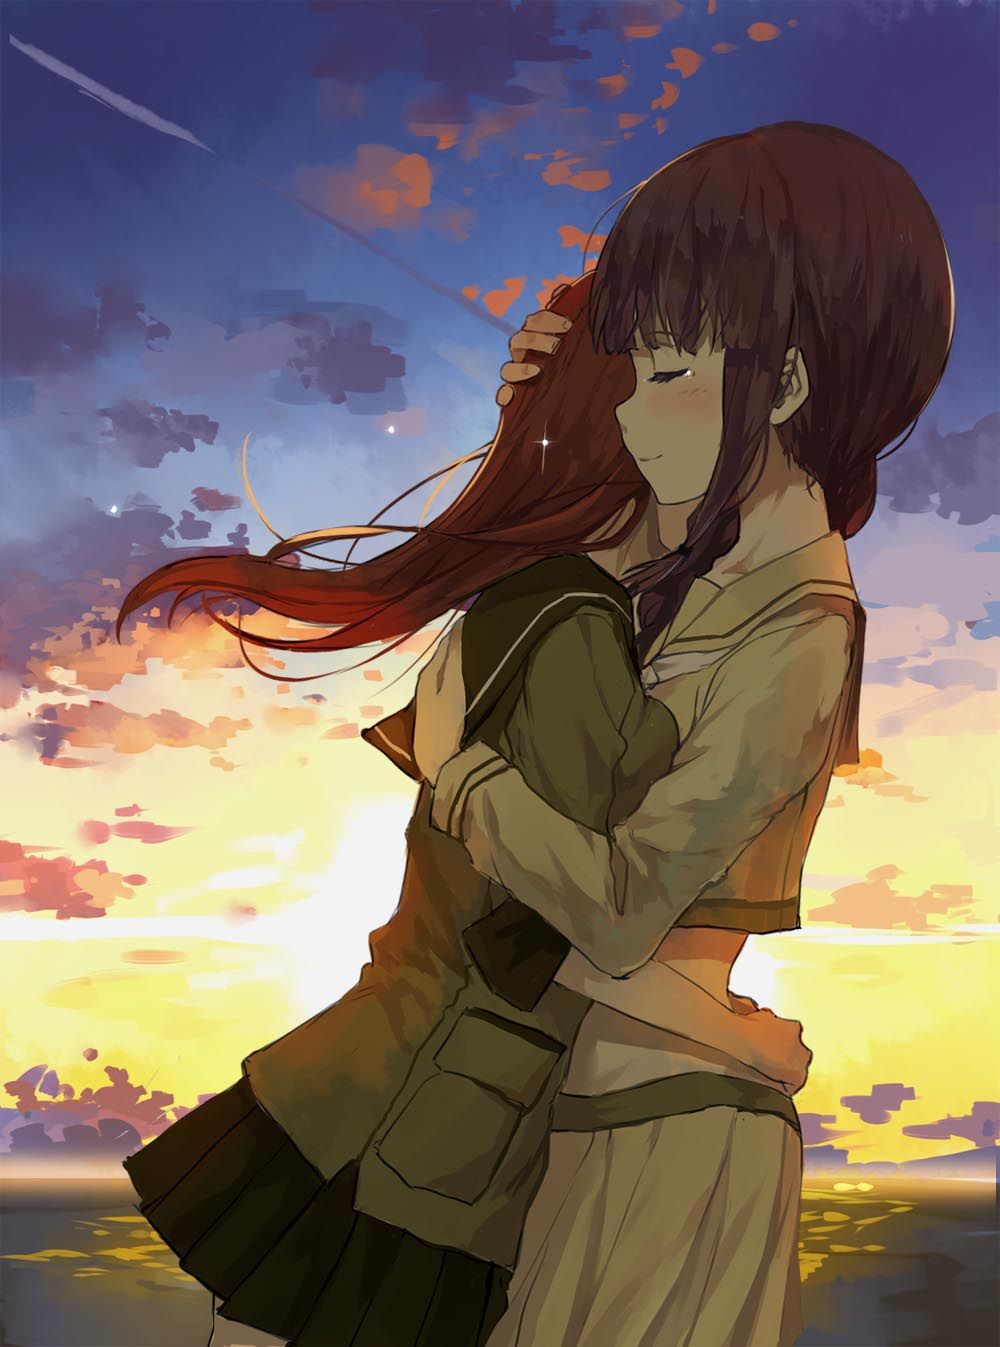 [Secondary] [Ship it] kitakami and ōi was our cute image she wants! 6